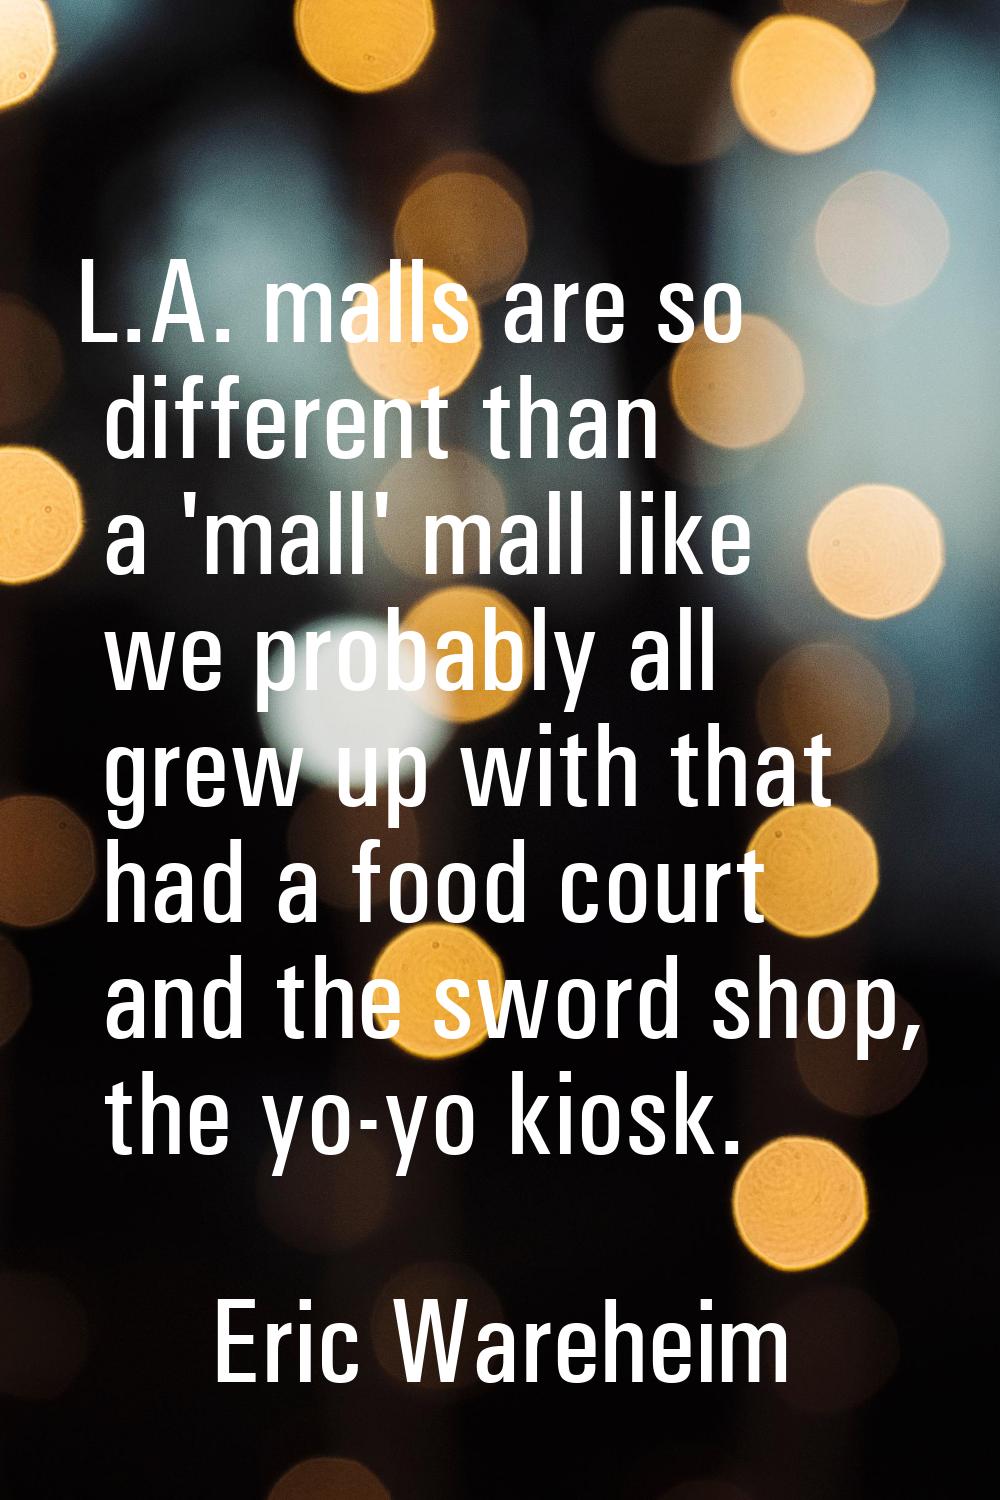 L.A. malls are so different than a 'mall' mall like we probably all grew up with that had a food co